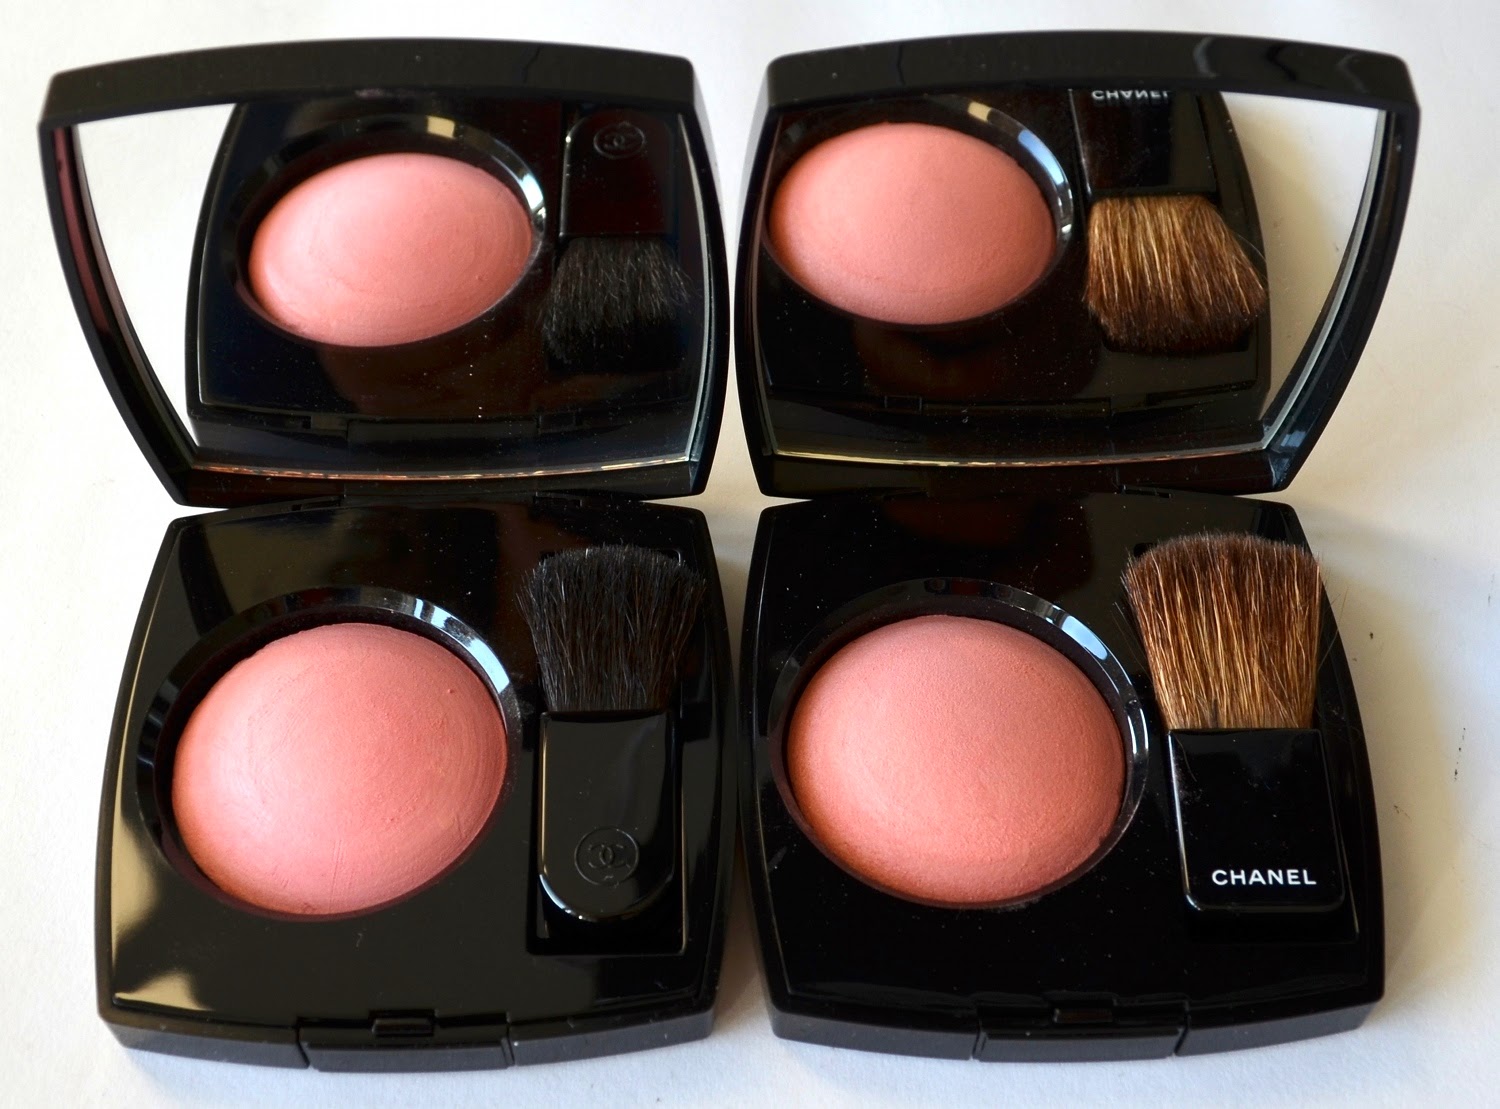 Chanel JOUES CONTRASTE Powder Blush Swatch and Review